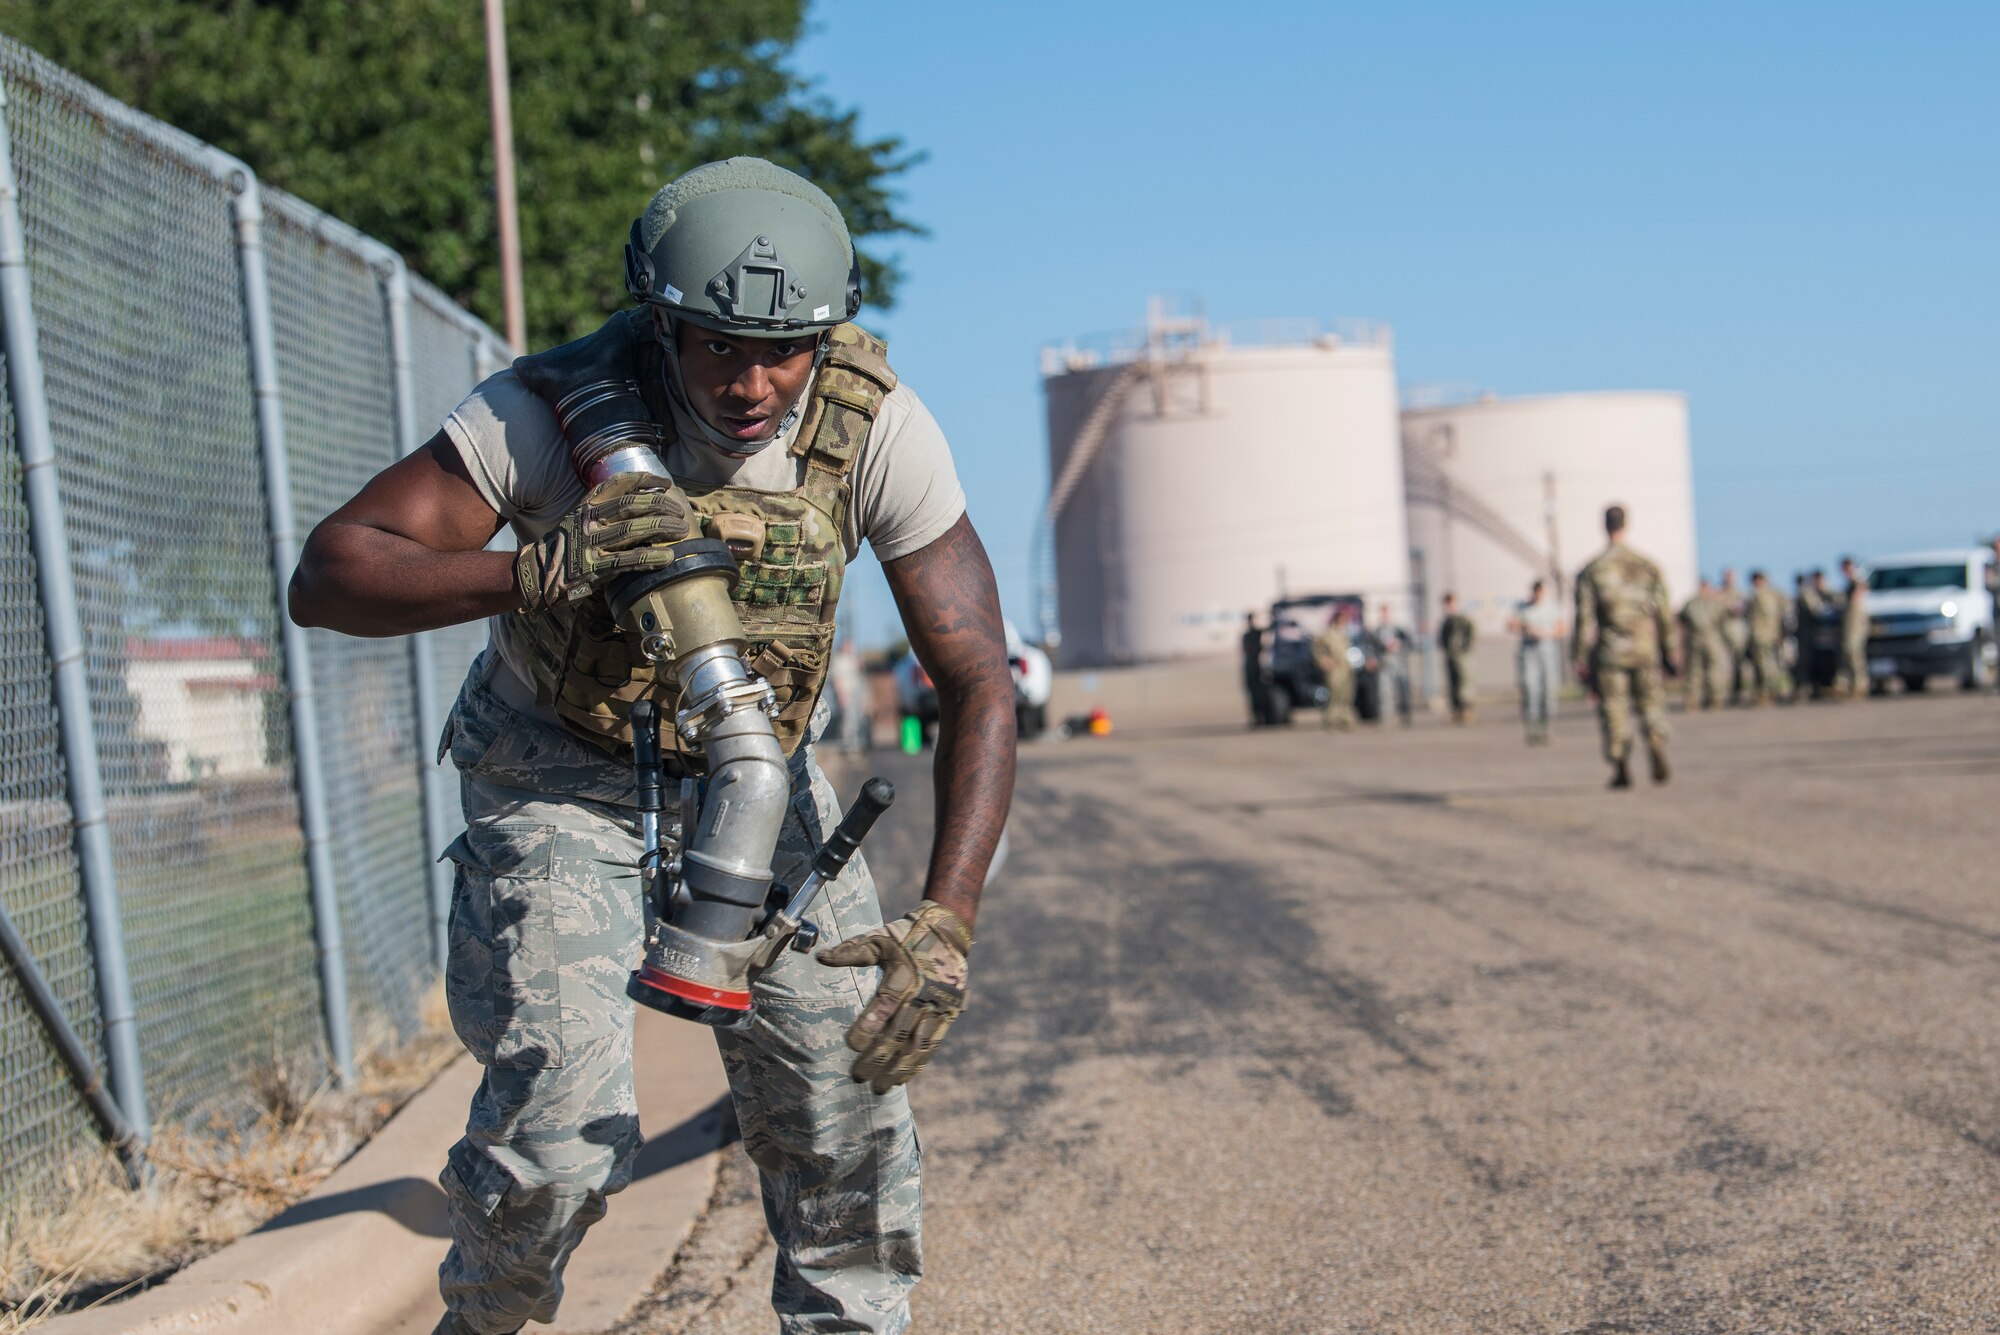 Senior Airman Demar Johnson, 27th Special Operations Logistics Readiness Squadron fuels service journeyman, drags a 300 foot fuel hose during the Forward Air Refueling Point tryouts at Cannon Air Force Base, N.M., October 9, 2019. The FARP team is composed of nine members and are currently aiming to grow to a unit of 12. (U.S. Air Force photo by Senior Airman Vernon R. Walter III)